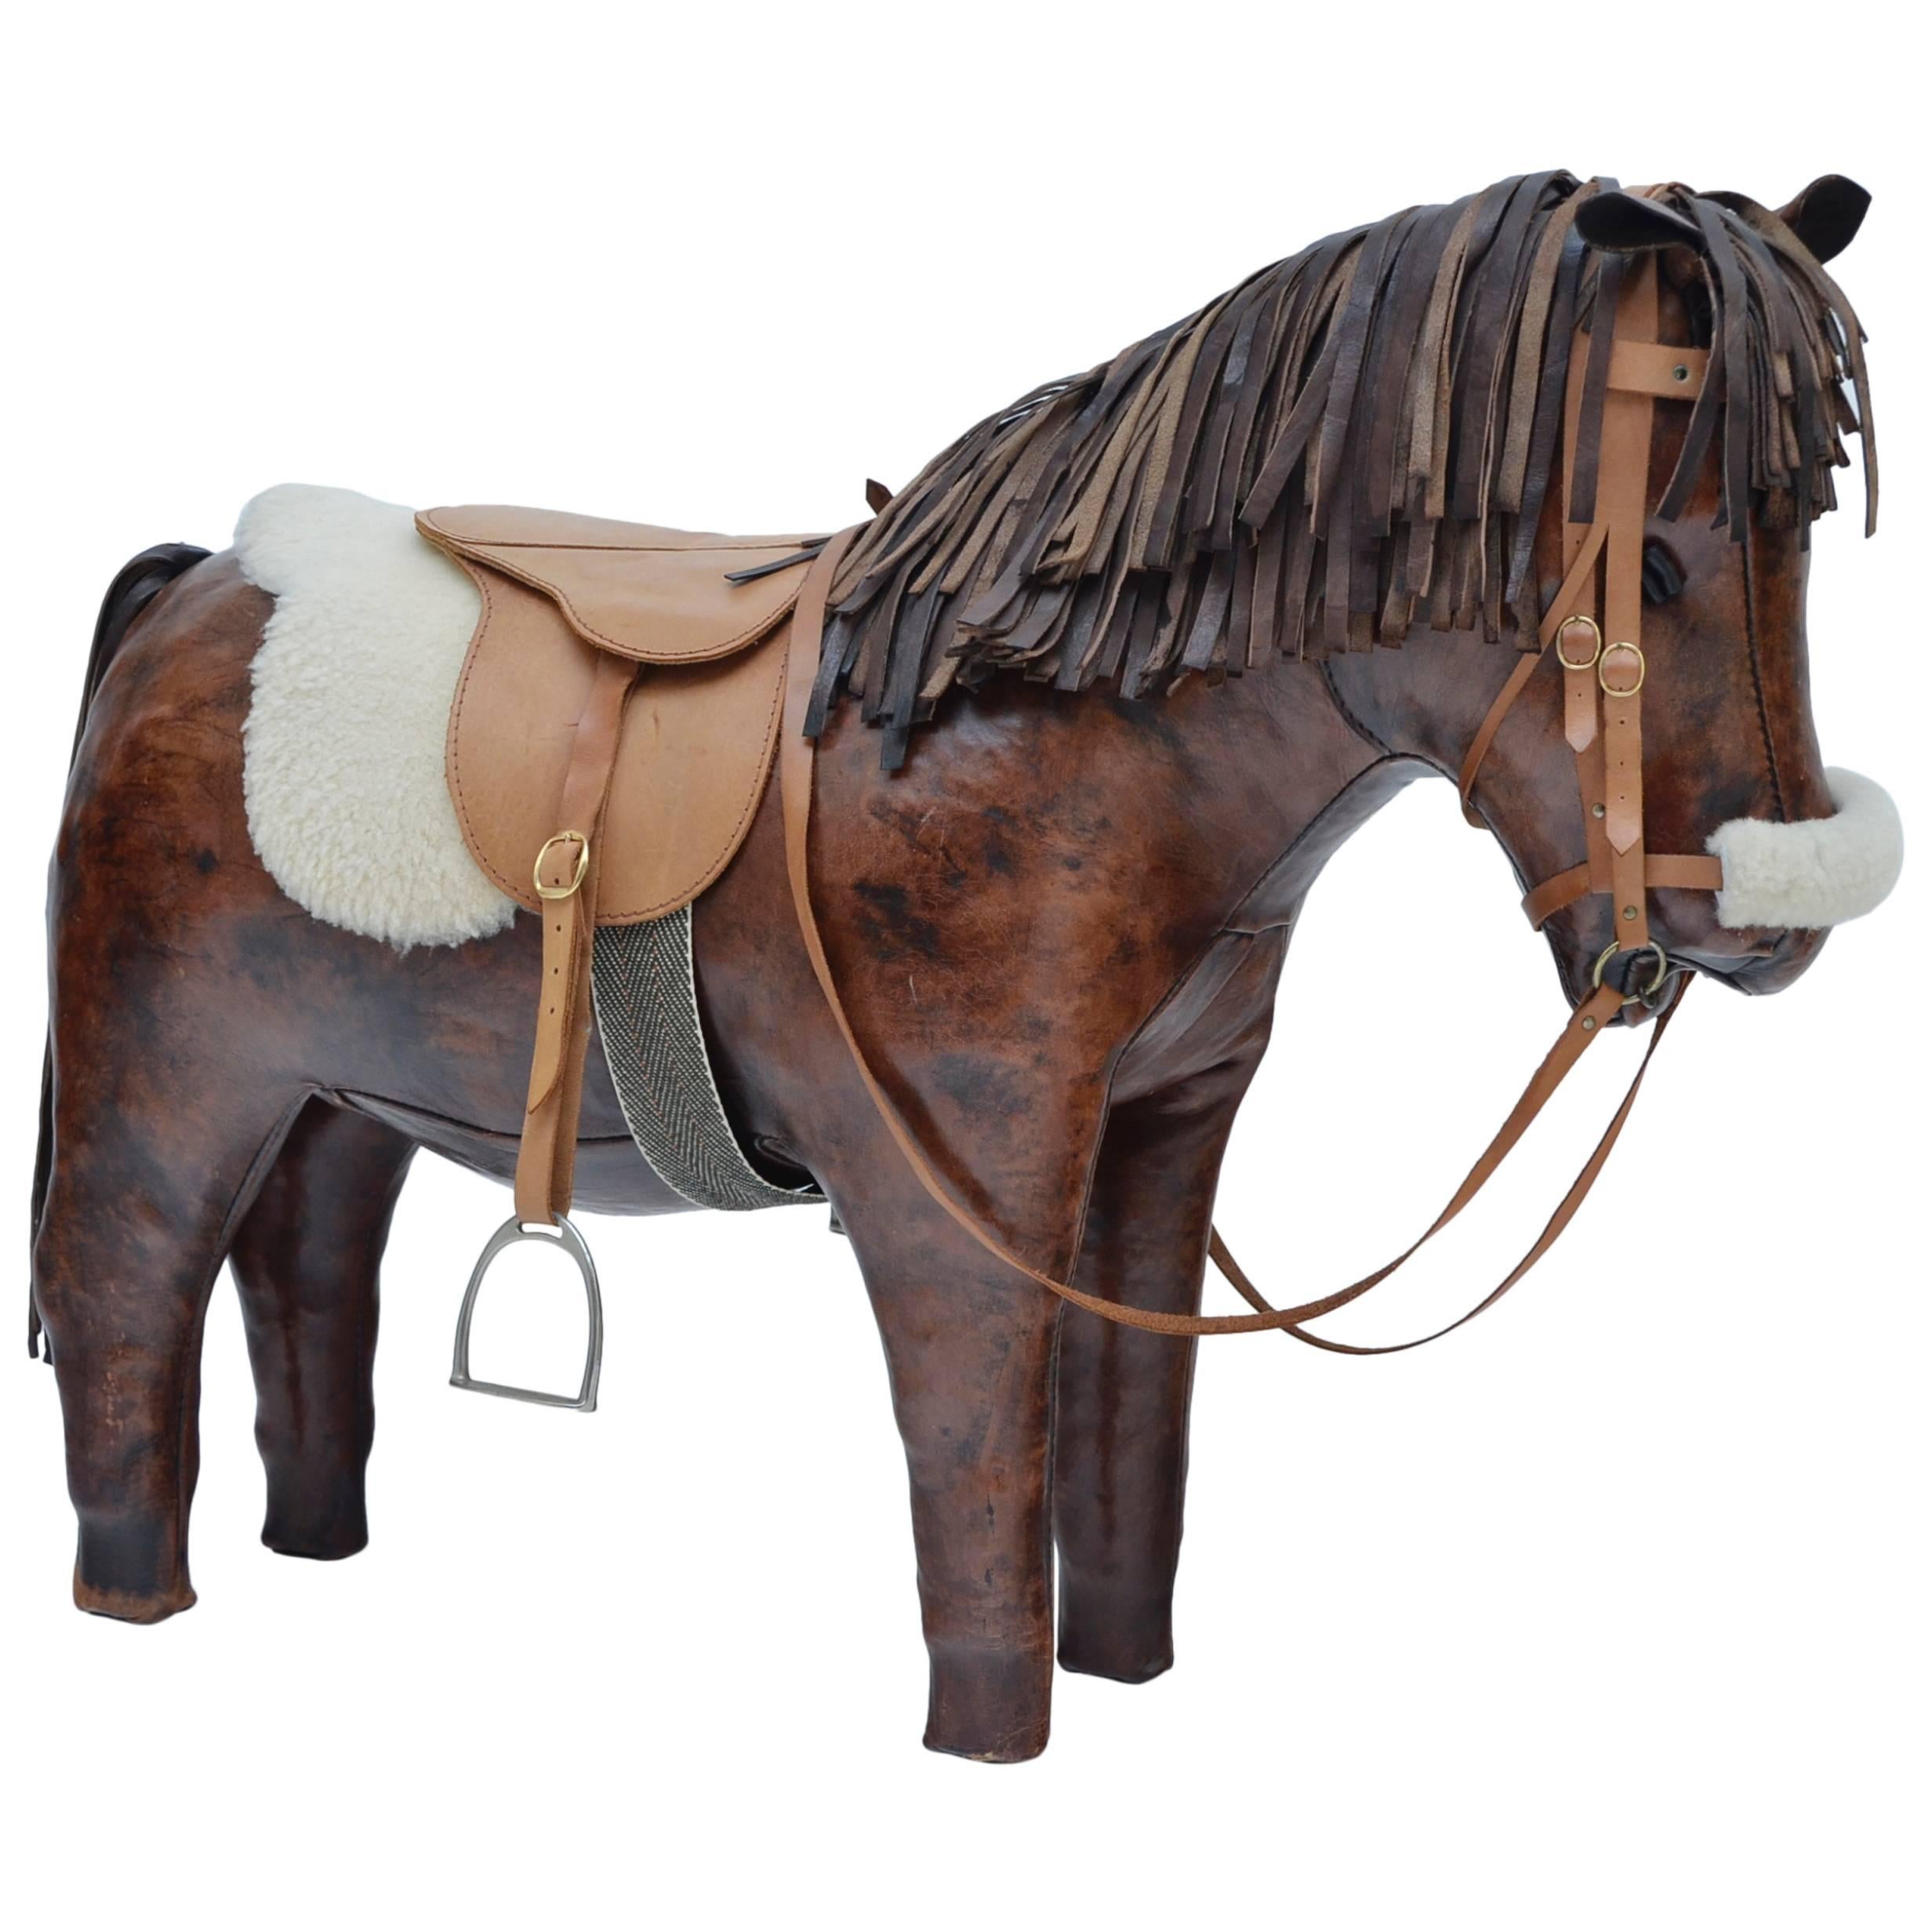  Leather Horse  By Dimitri Omersa For Abercrombie & Fitch